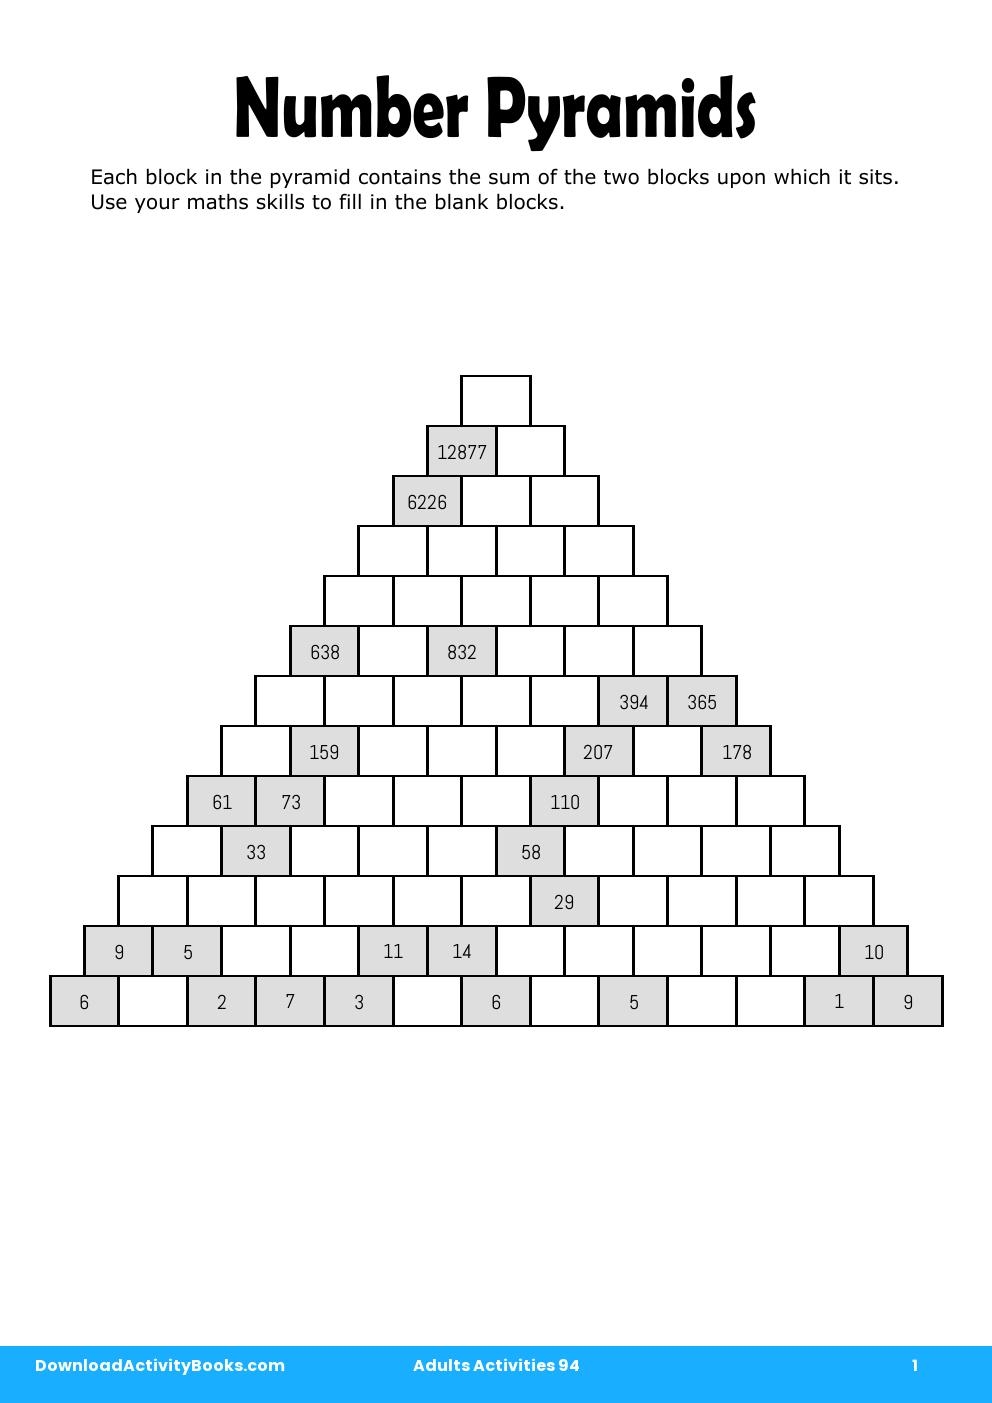 Number Pyramids in Adults Activities 94